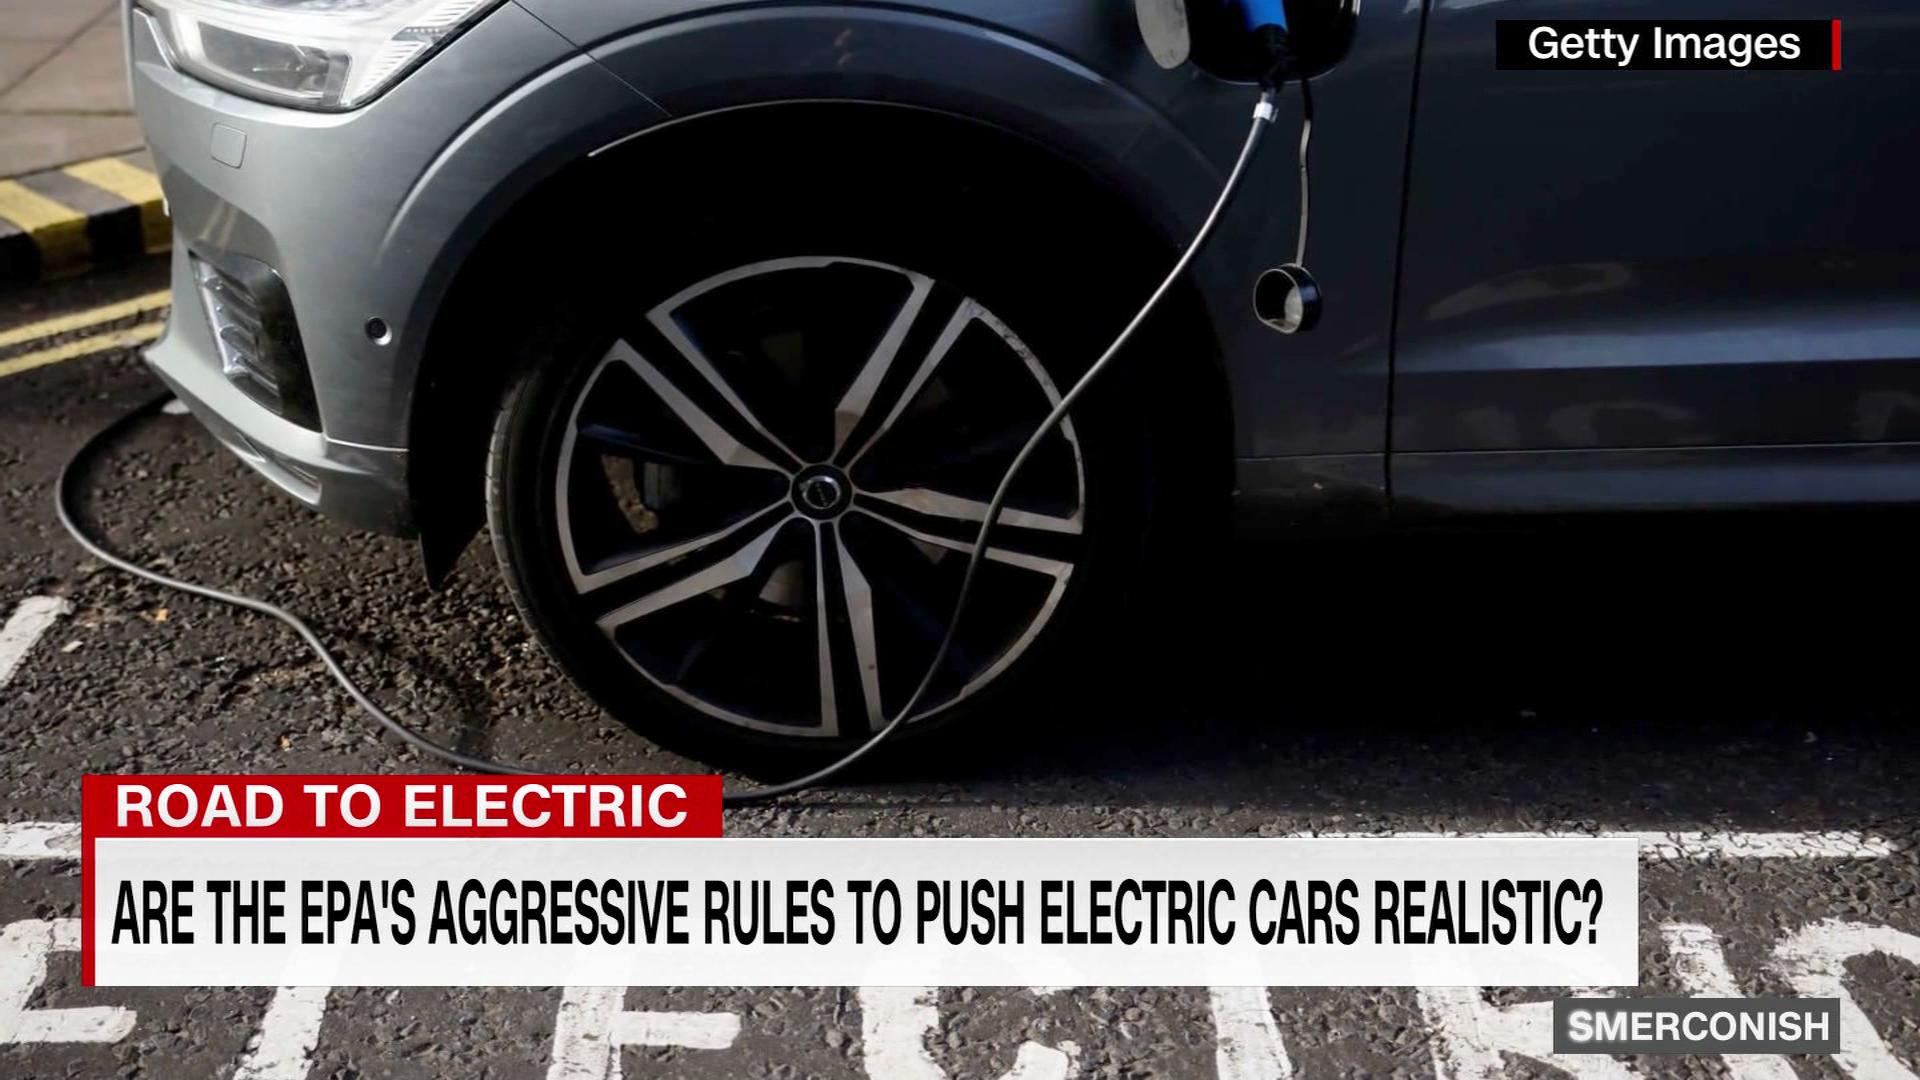 Consumers can now find huge discounts on electric cars